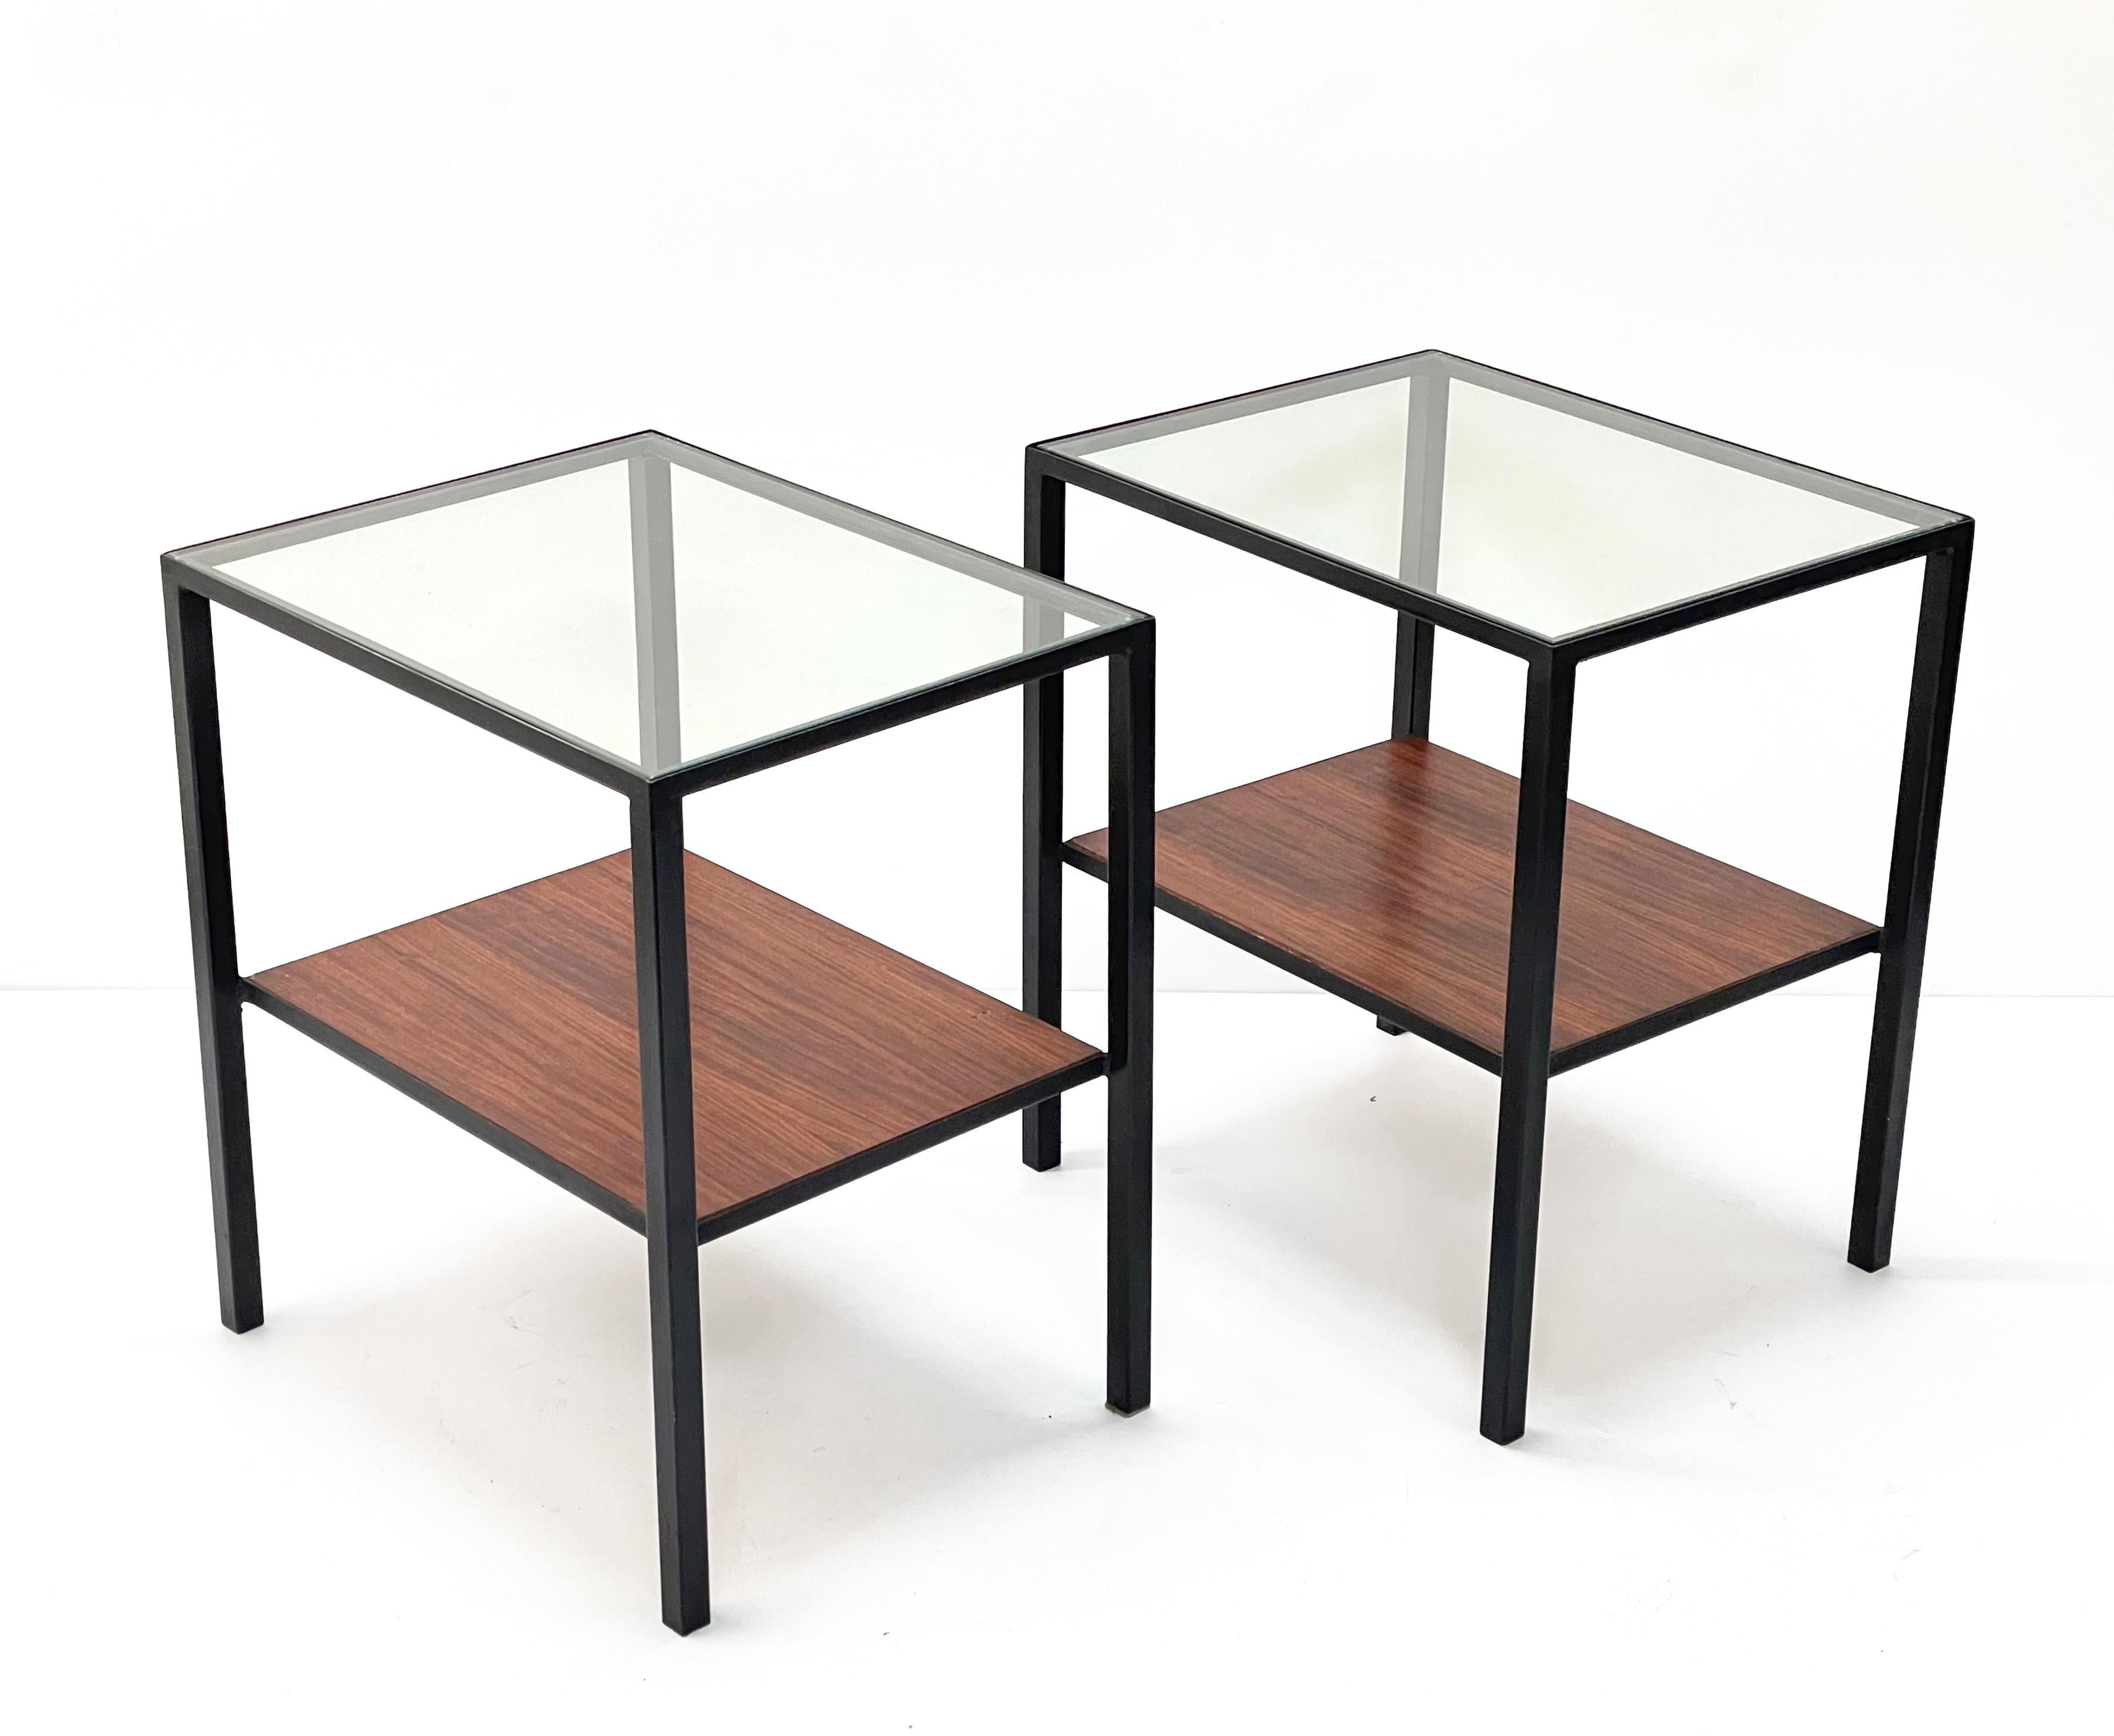 Pair of Iron, Glass and Wood Italian Coffee Table with Two Shelves, 1960s For Sale 4